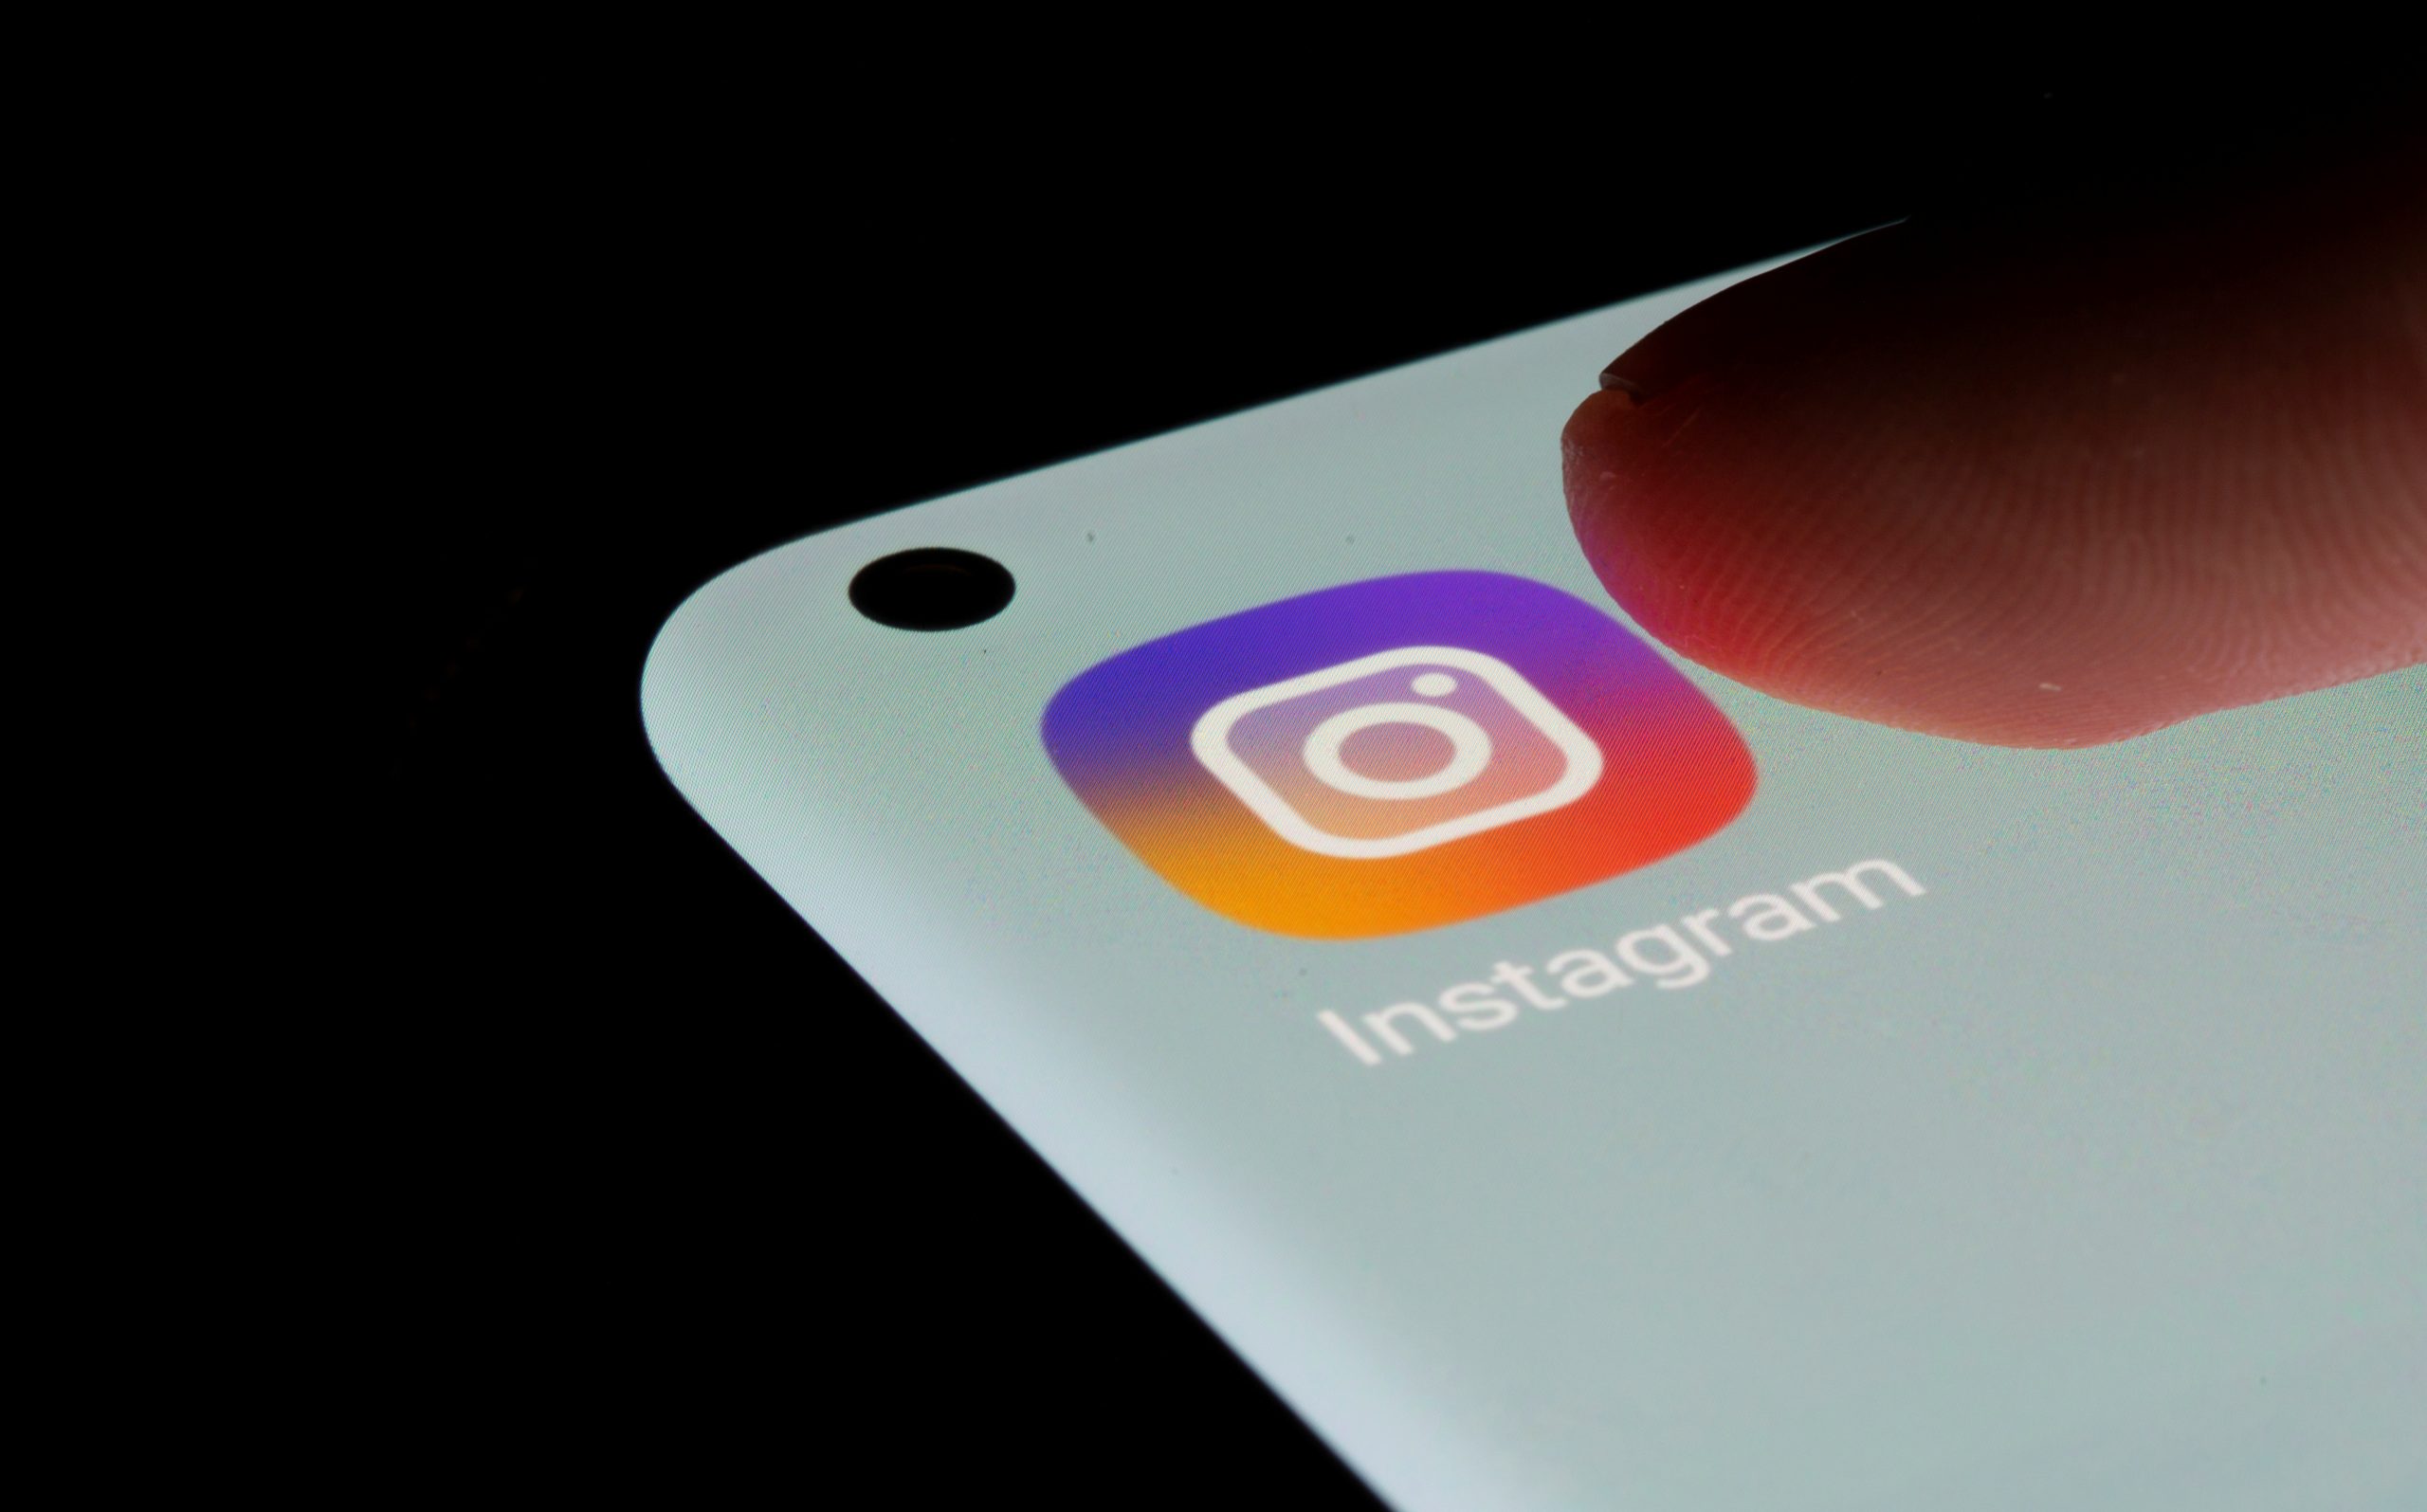 Instagram tests Limits feature to curb targeted harassment | Engadget